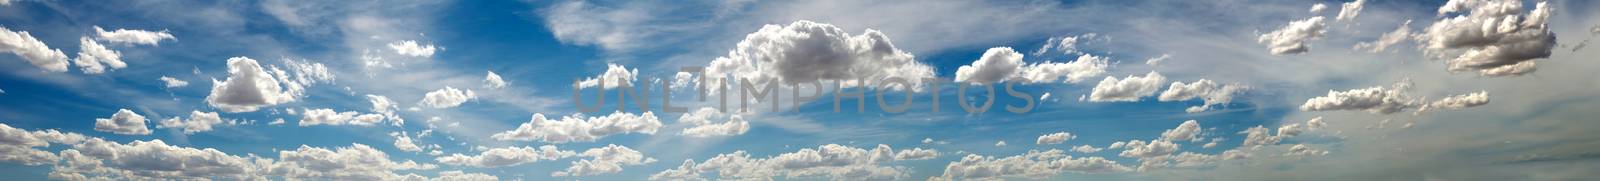 Panoramic photo of the sky with clouds by deyan_georgiev